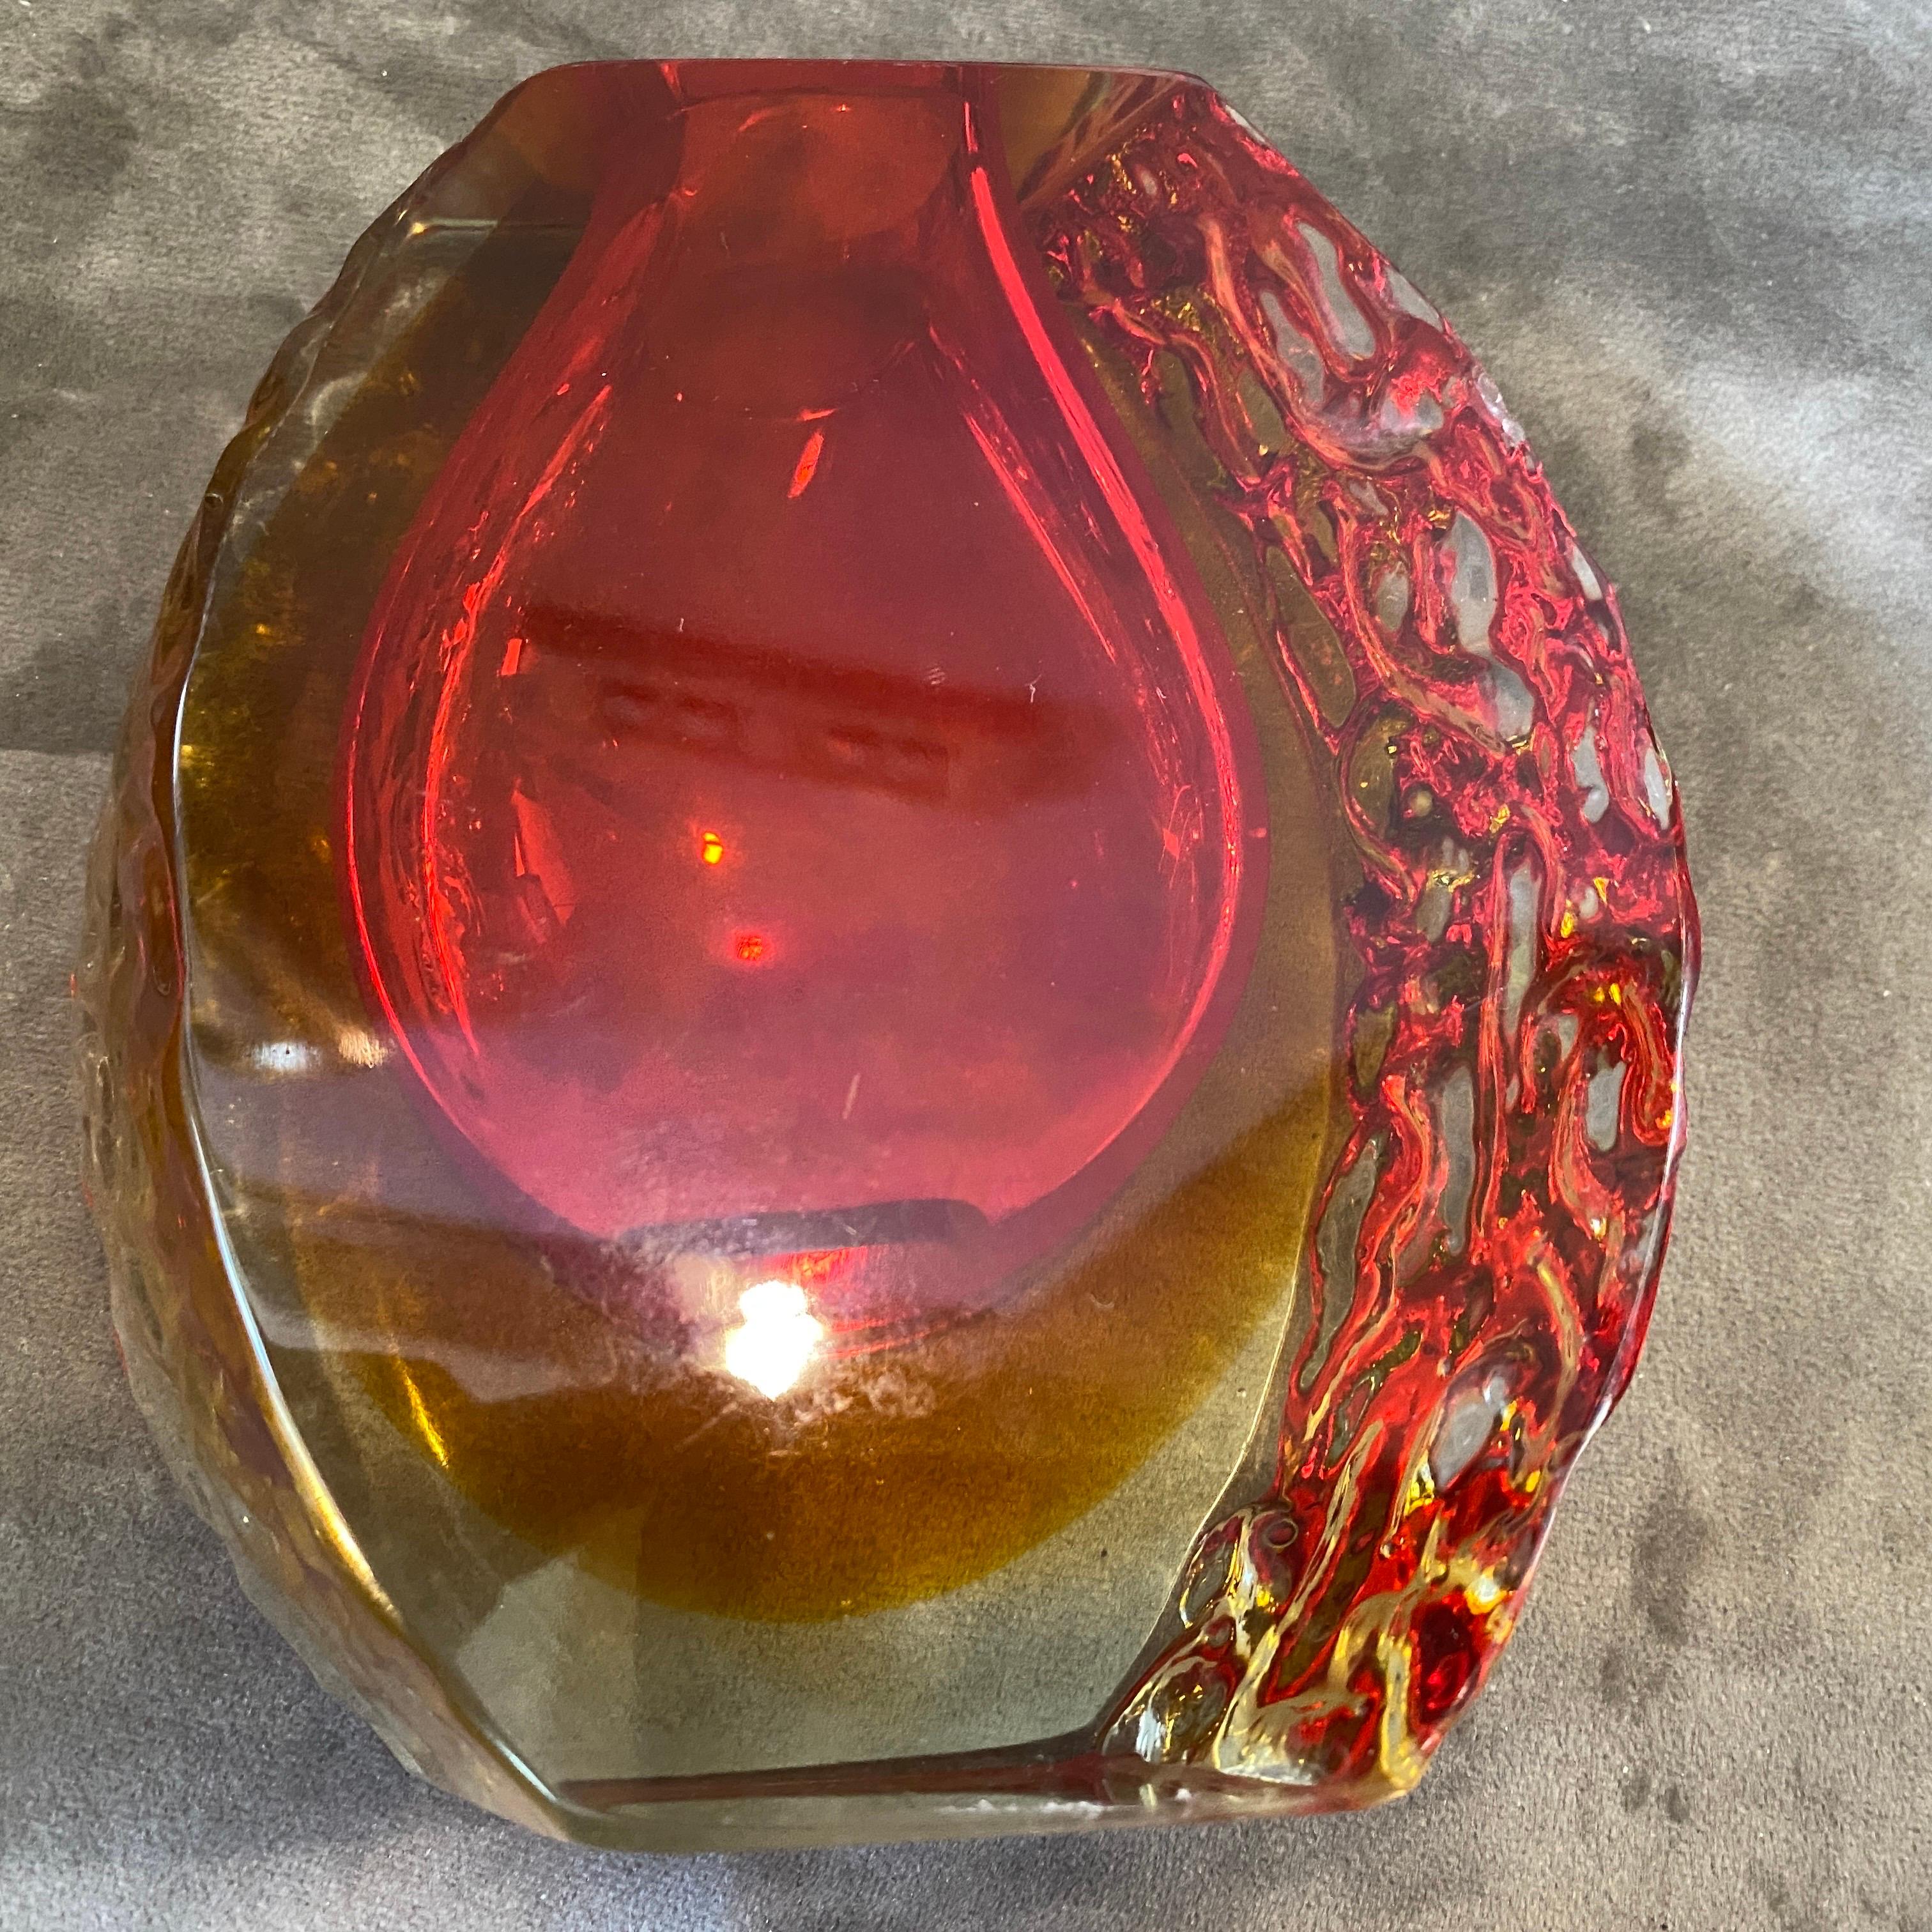 1960s Mandruzzato Mid-Century Modern Red and Yellow Sommerso Murano Glass Vase For Sale 2